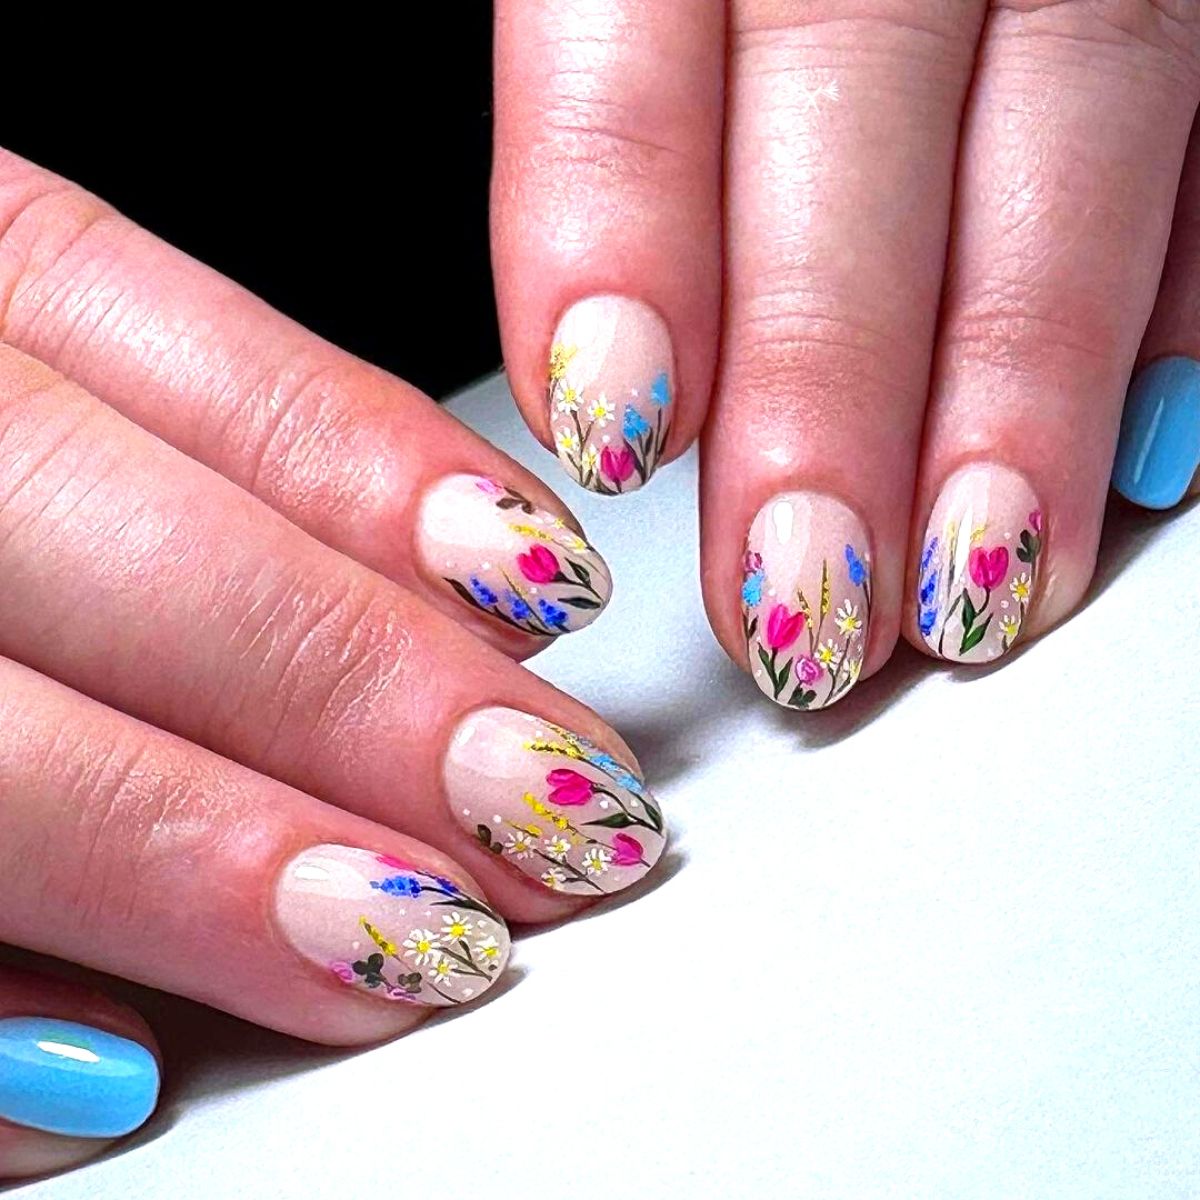 Out with spring and in with summer with flowers on nails